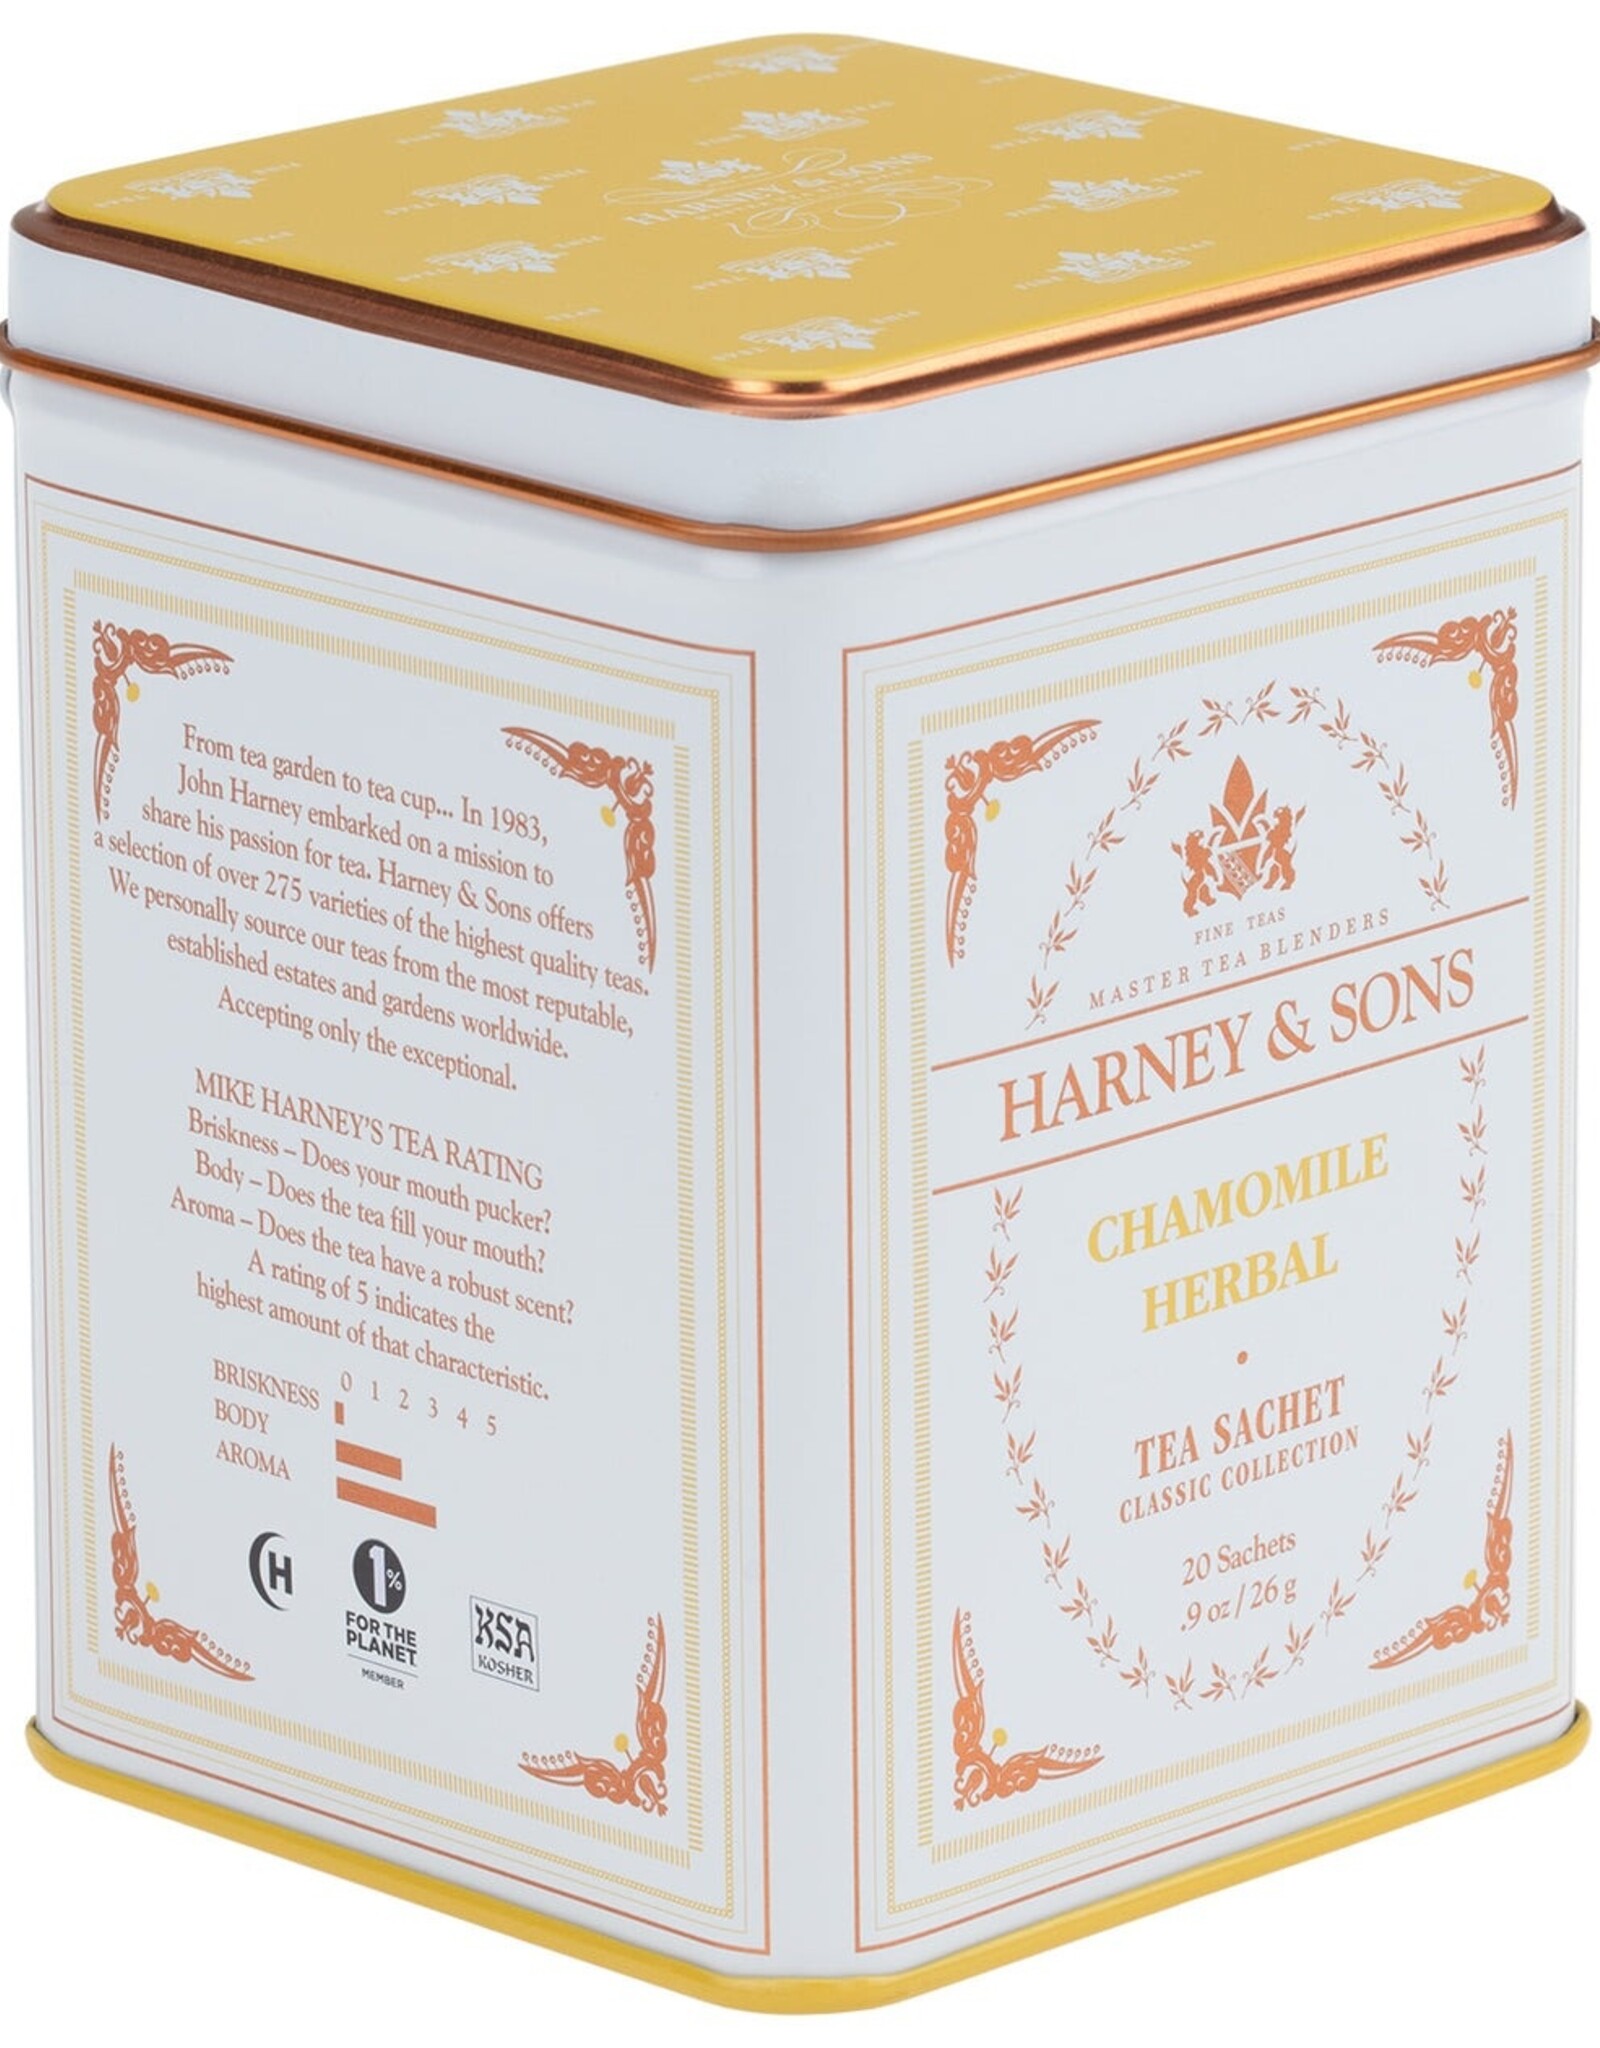 Harney and Sons Tea Classic Chamomile Sachets, 20 Count